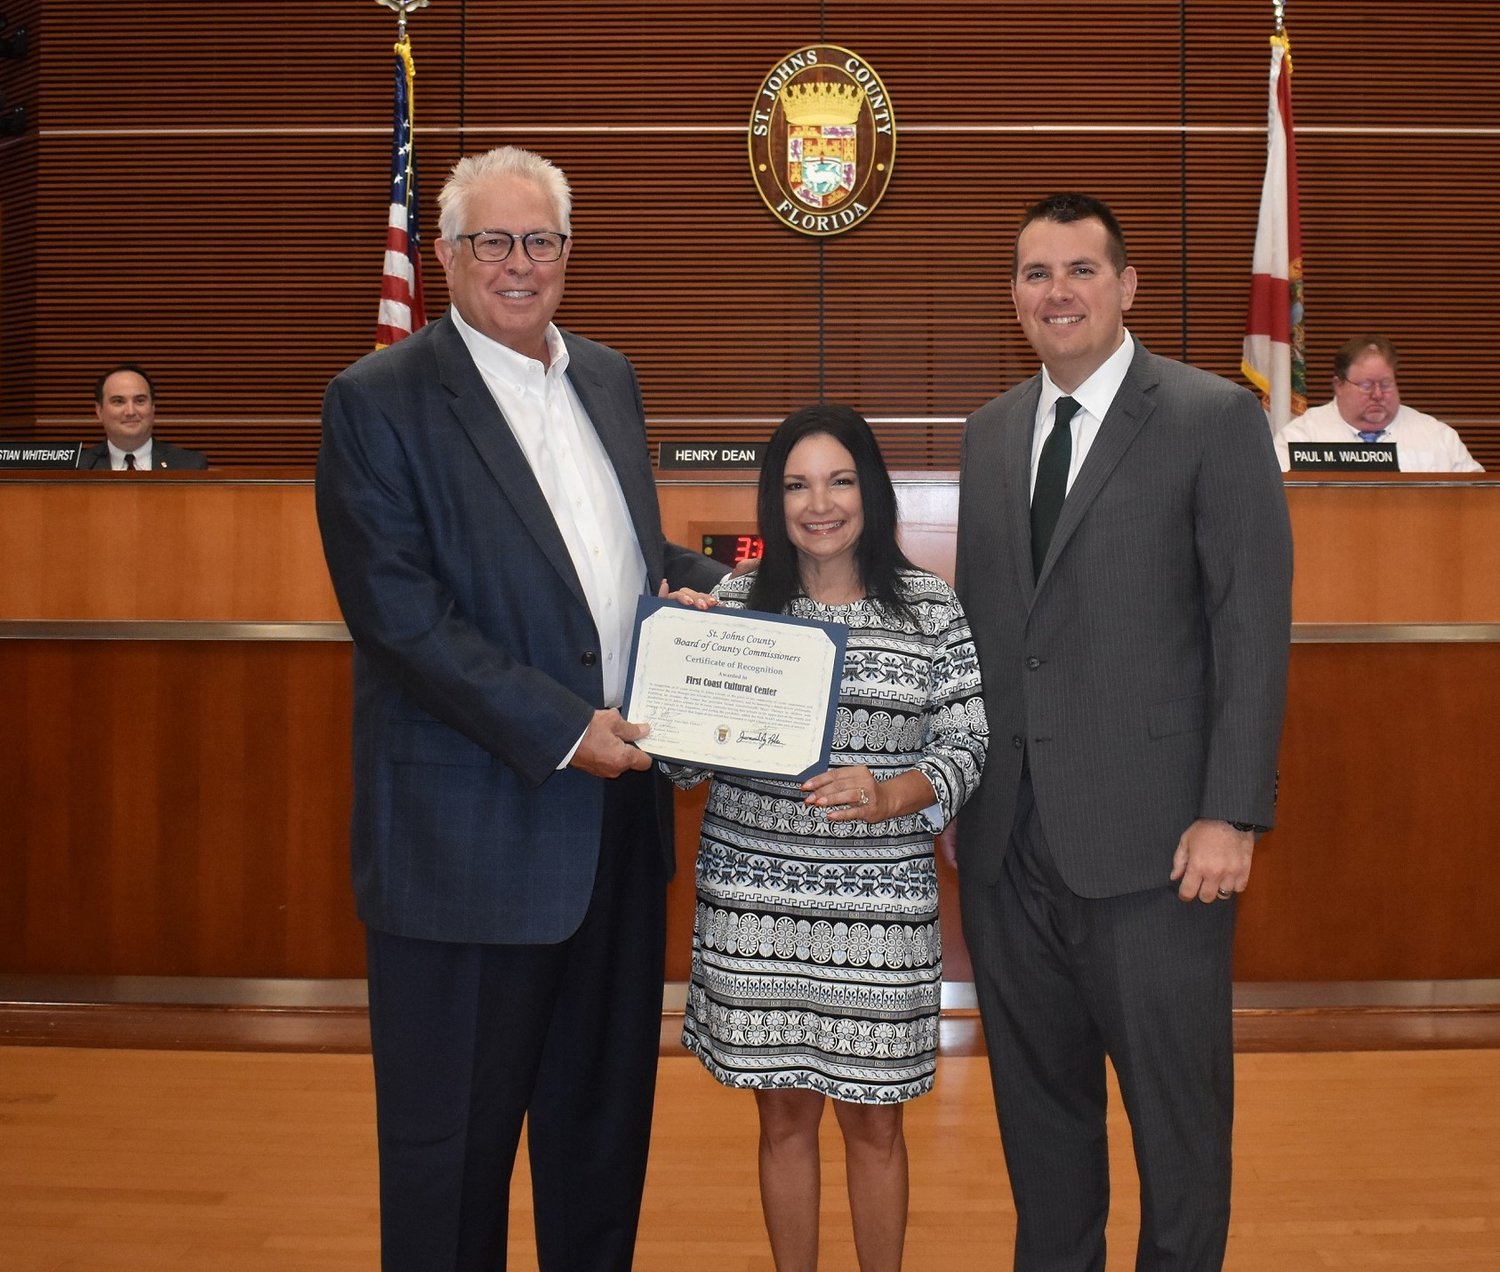 St. Johns County Commissioner Jeremiah Blocker, right, presents First Coast Cultural Center board chair Joe Bryant and Donna Guzzo, president and executive director, a certificate of recognition.